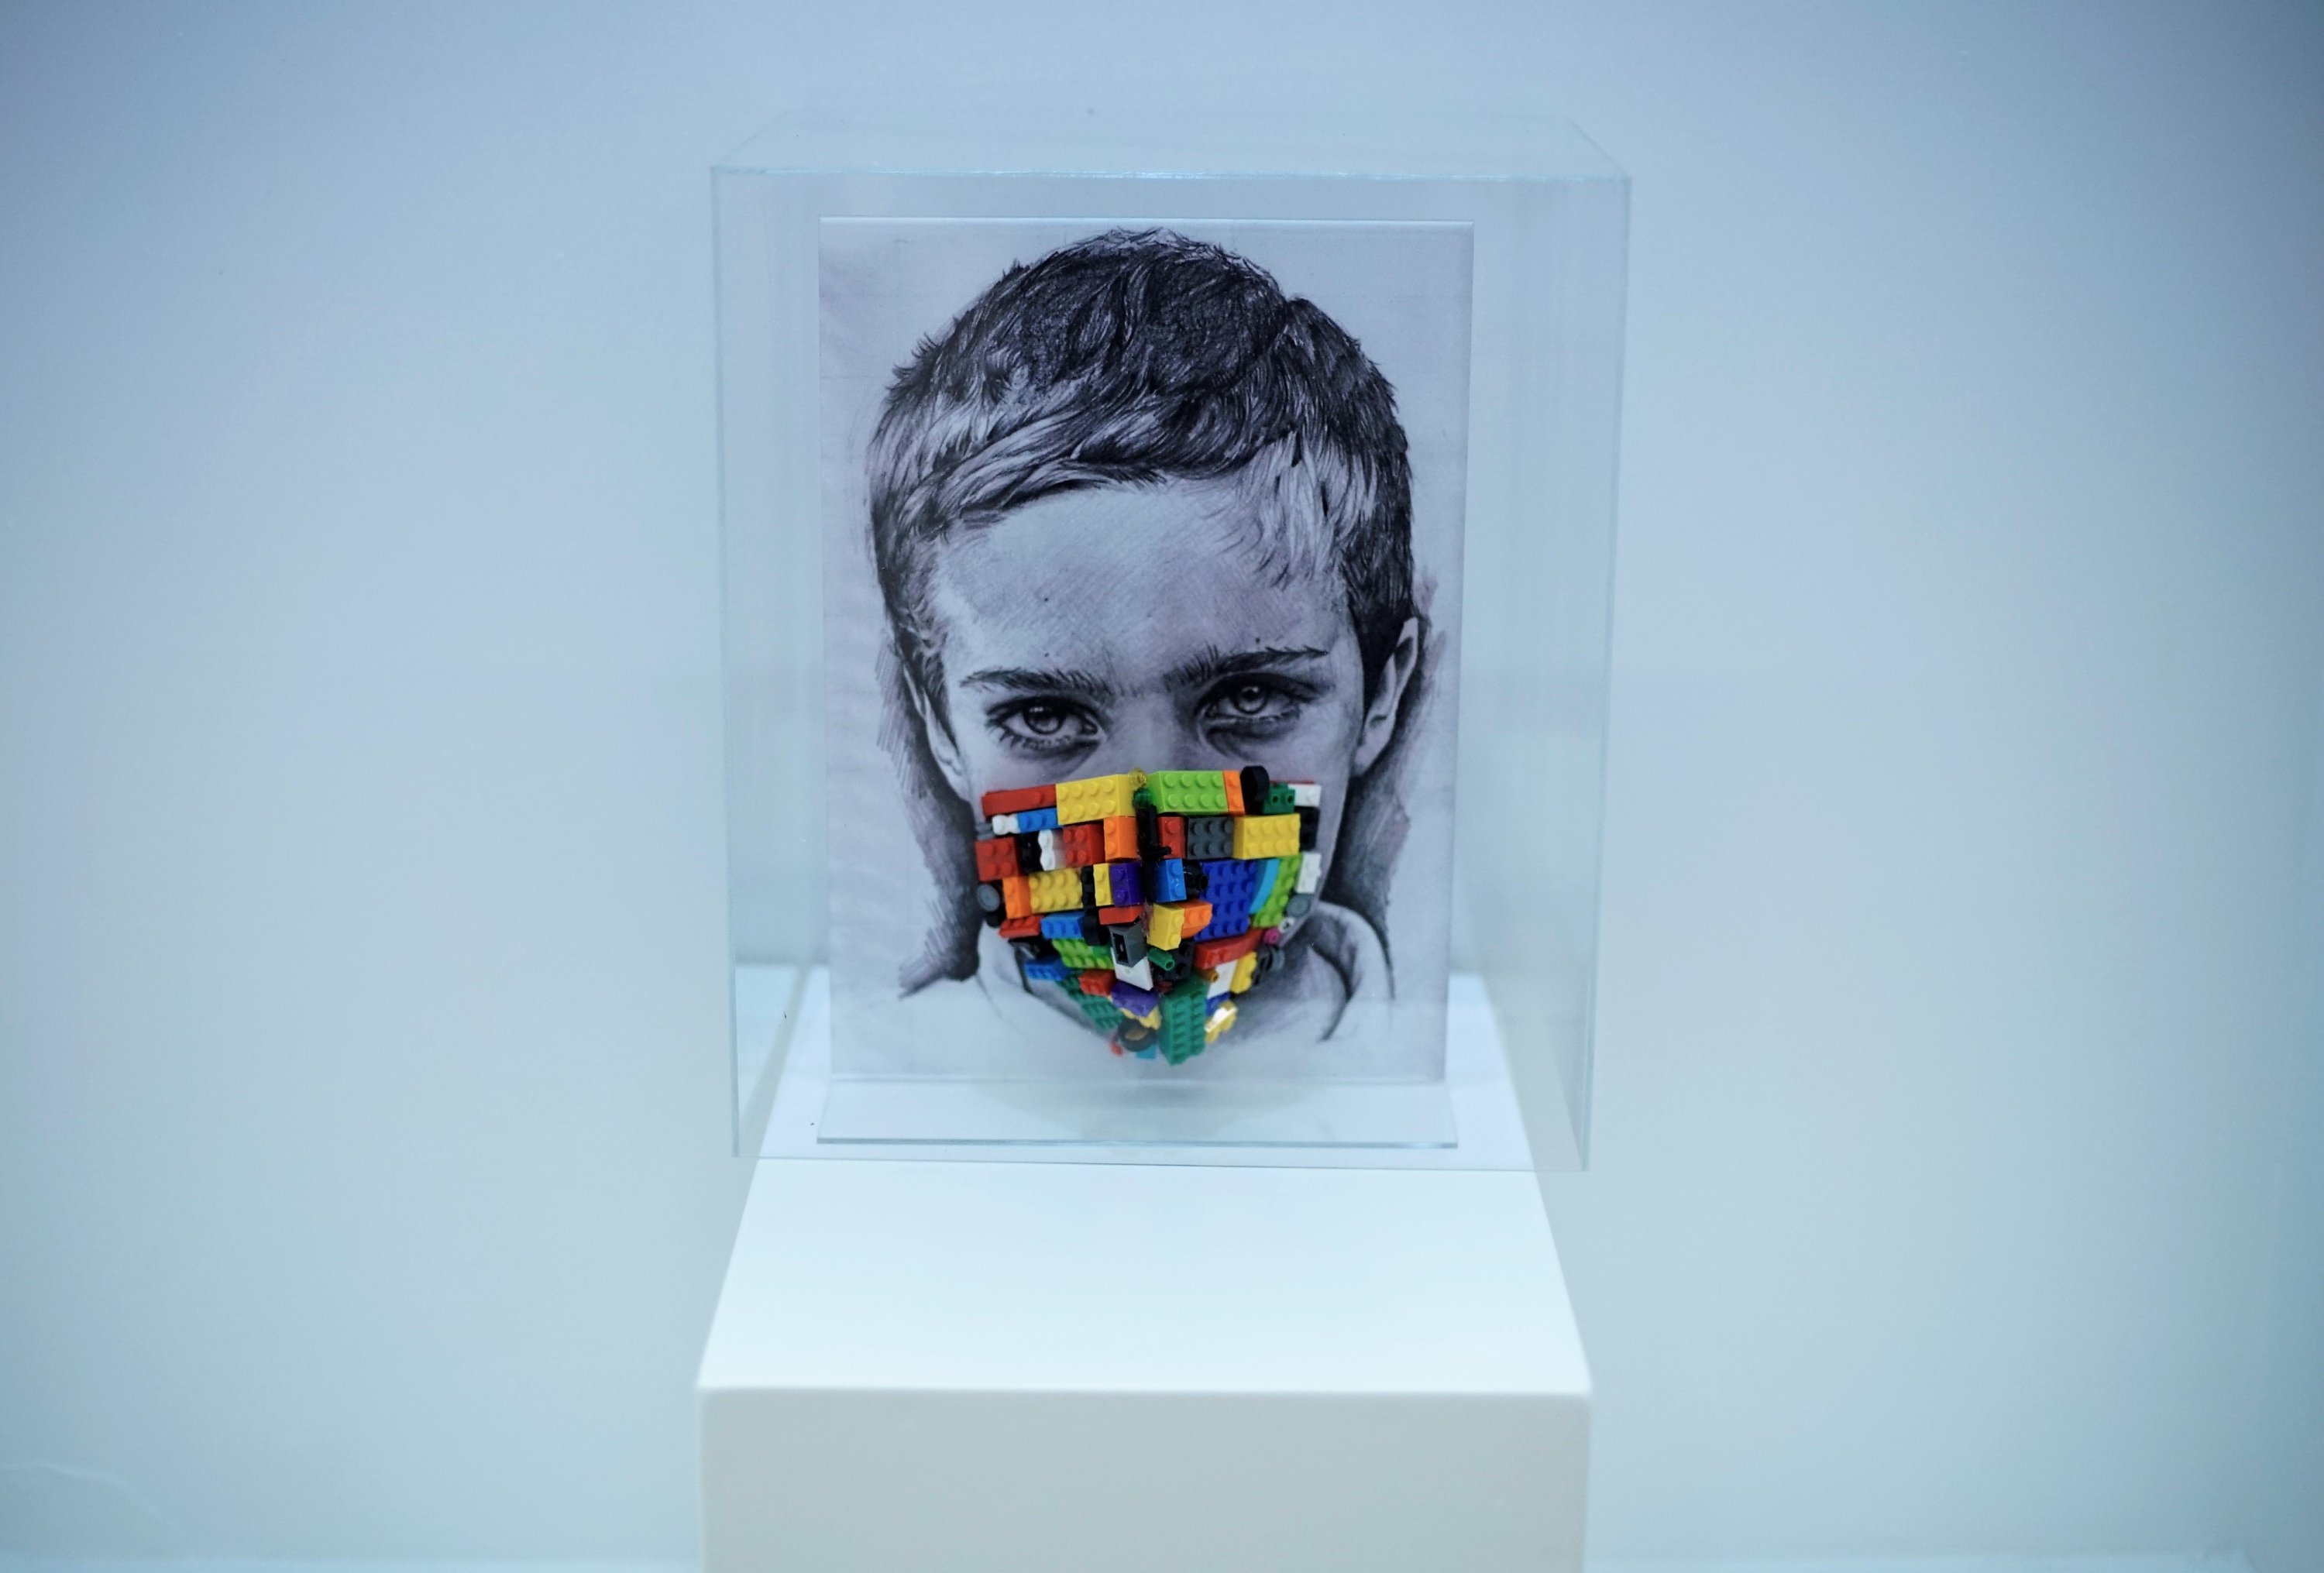 Simay Bülbül, “Childhood in the Glass Lantern,” installation of Lego pieces, plexi, masks on textiles, 33 by 24 centimeters.